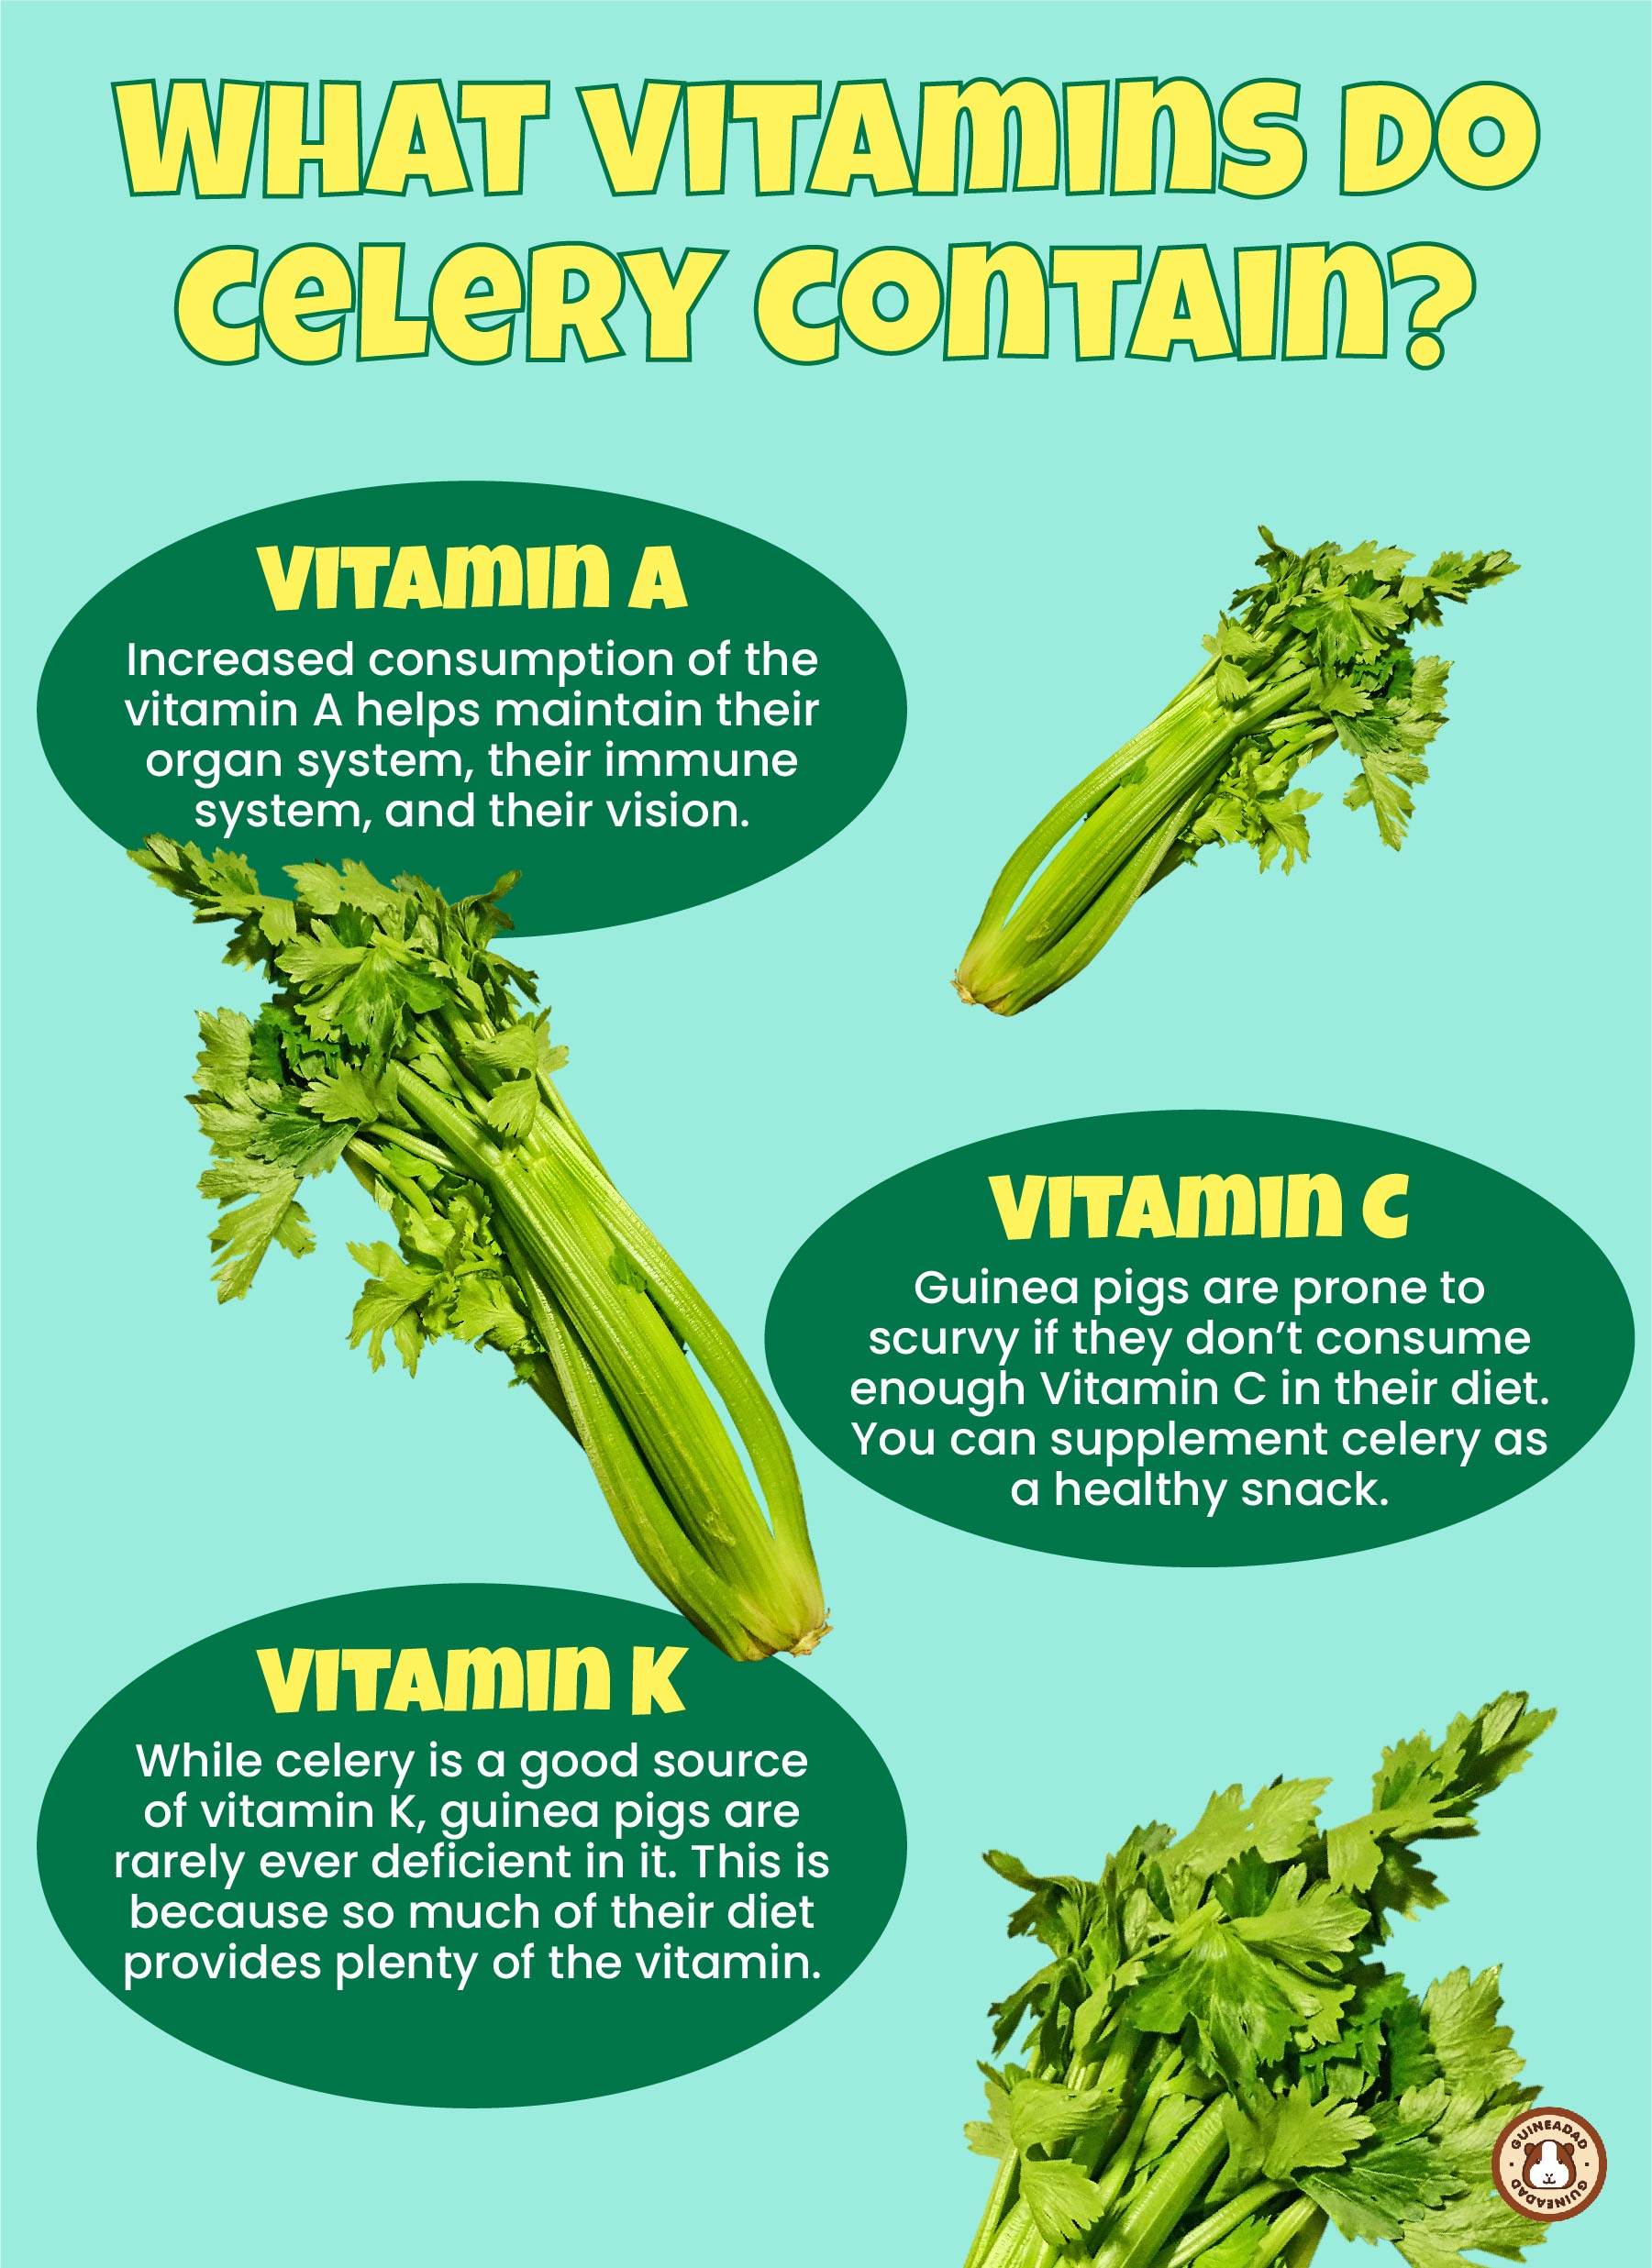 What Vitamins Do Celery Contain?